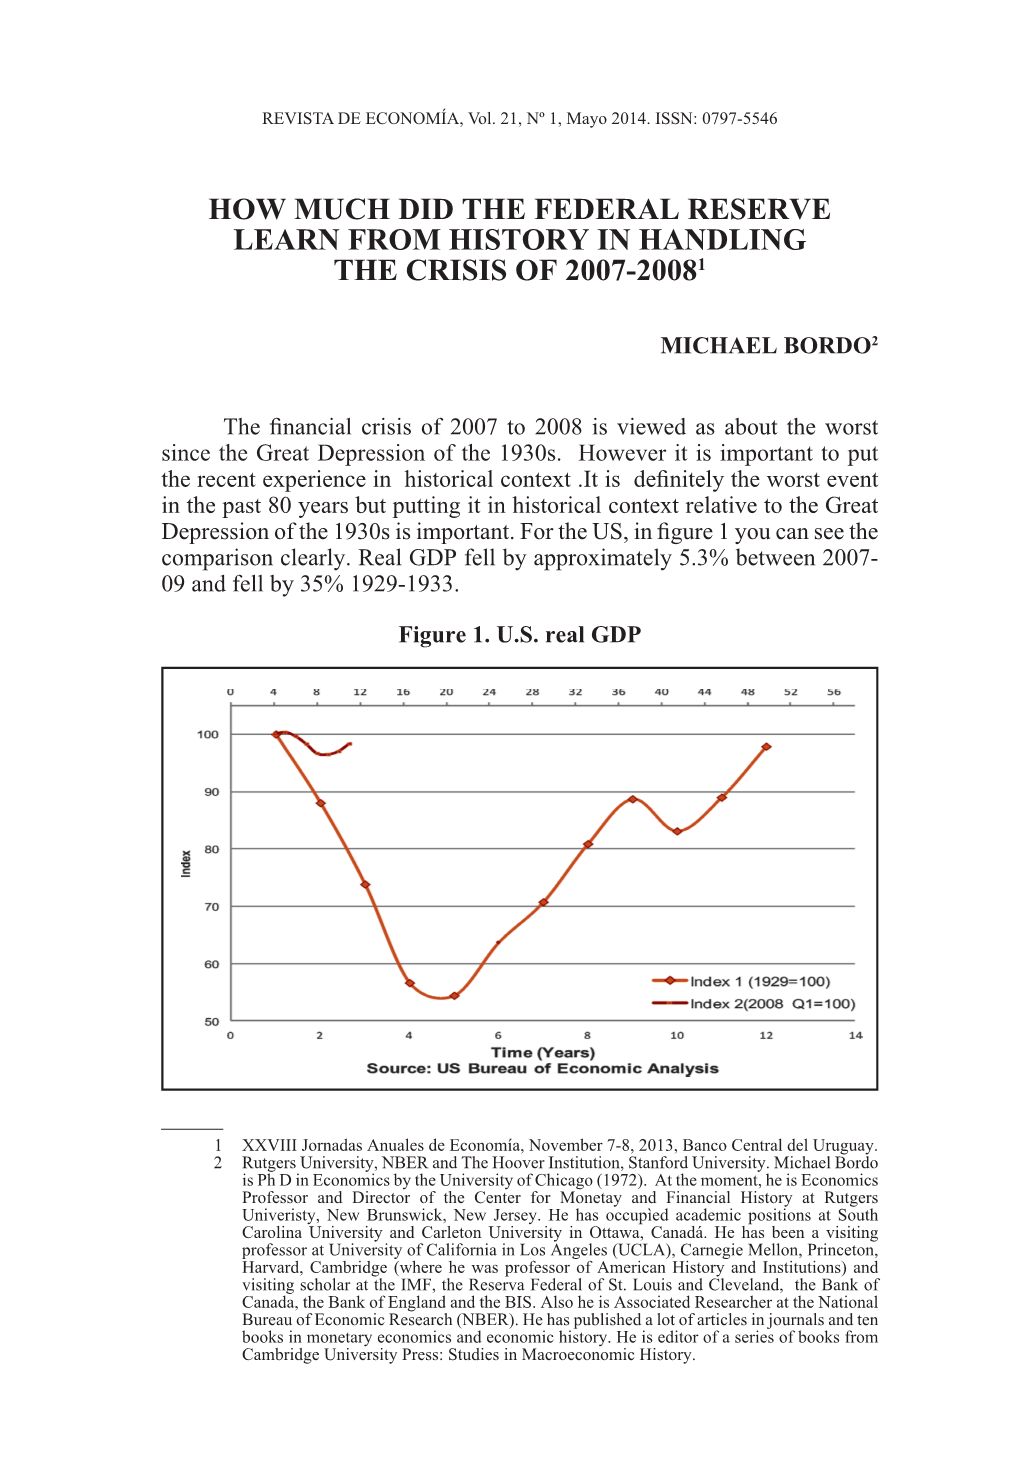 How Much Did the Federal Reserve Learn from History in Handling the Crisis of 2007-20081